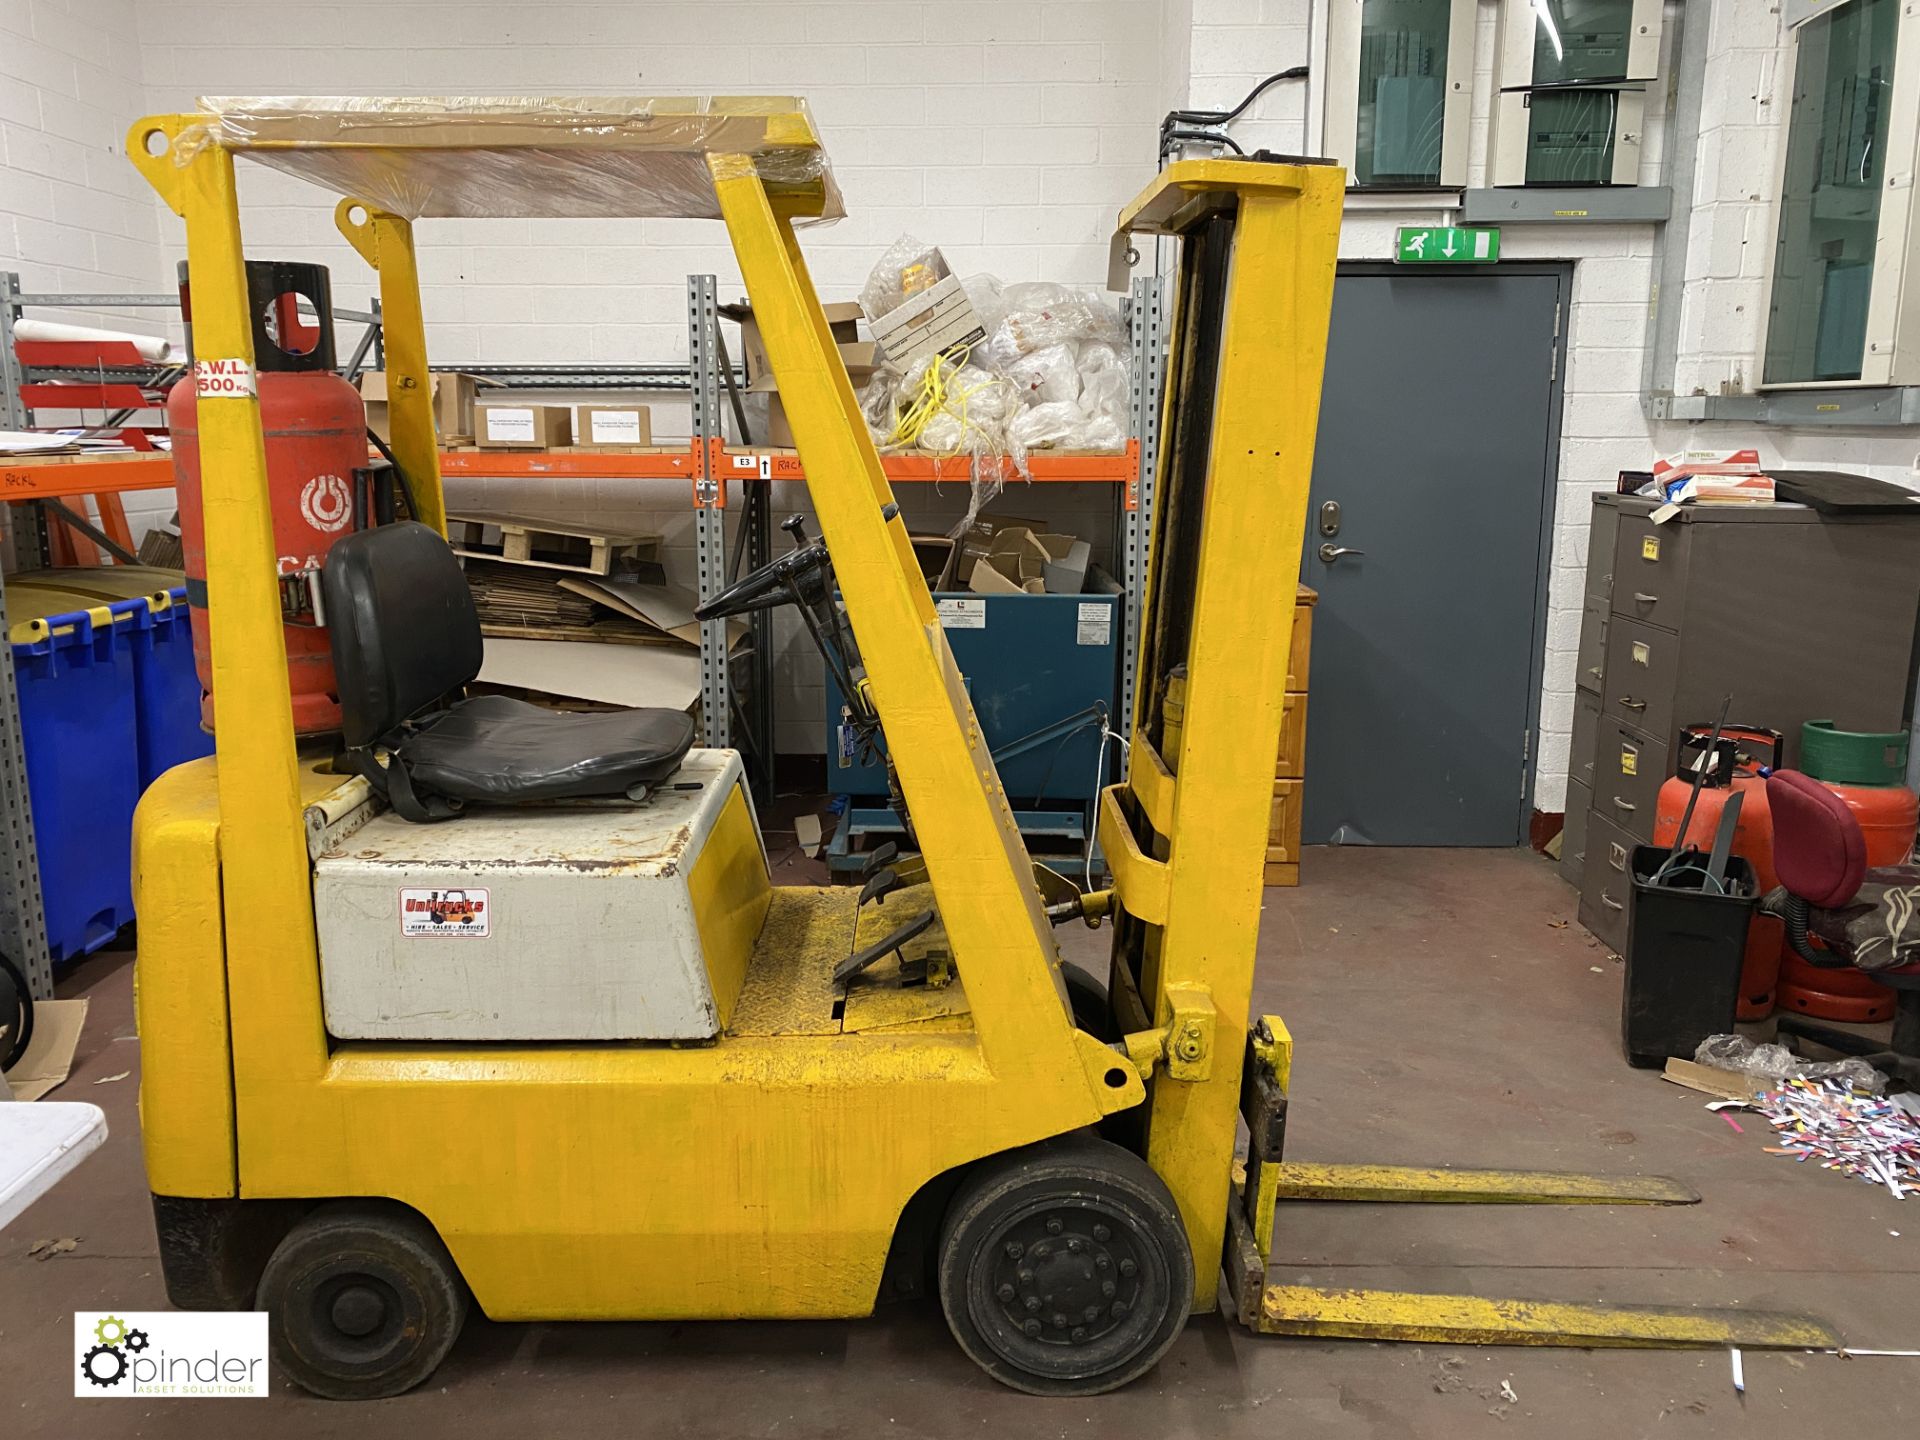 Toyota LPG Forklift Truck, 3000lbs capacity, 3472hours, duplex mast, lift height 3000mm, closed - Image 3 of 10